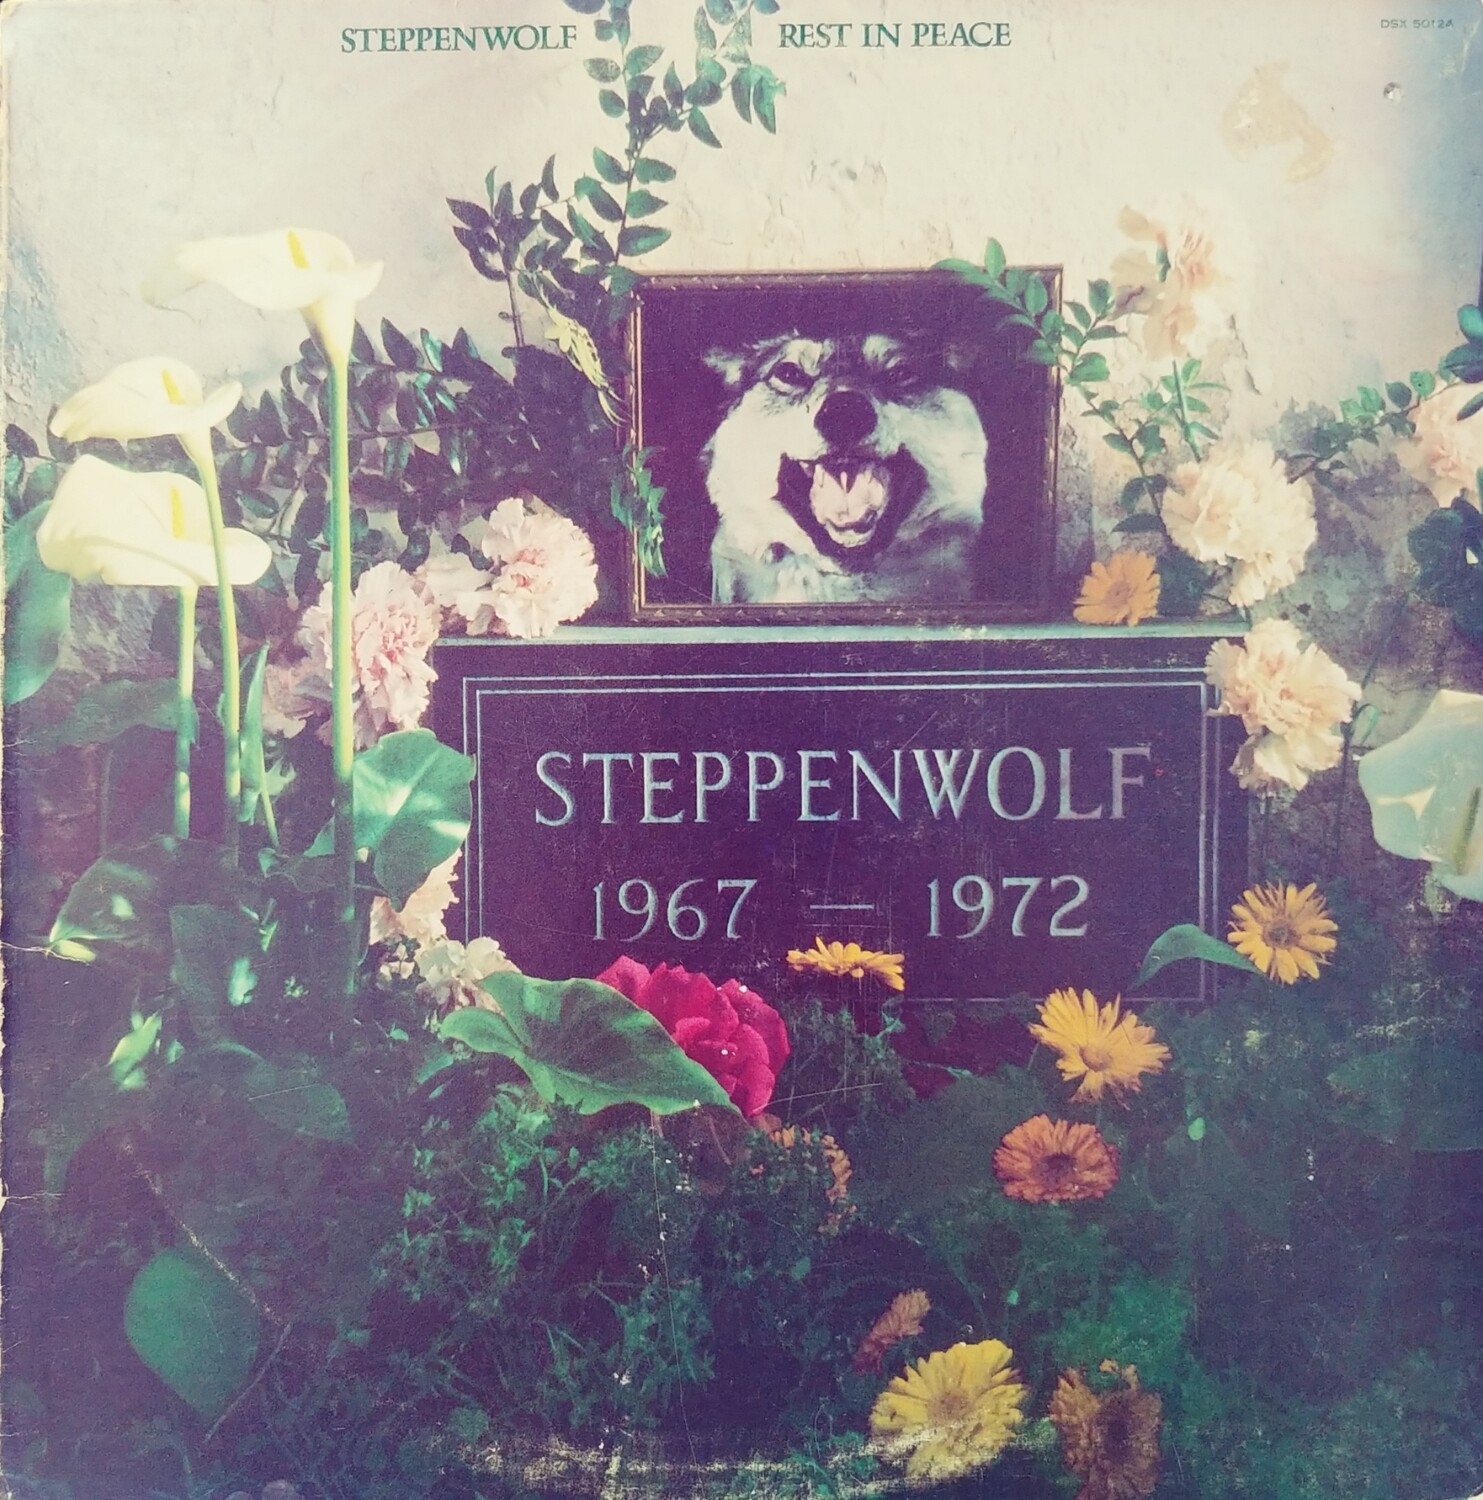 Steppenwolf - Rest in peace